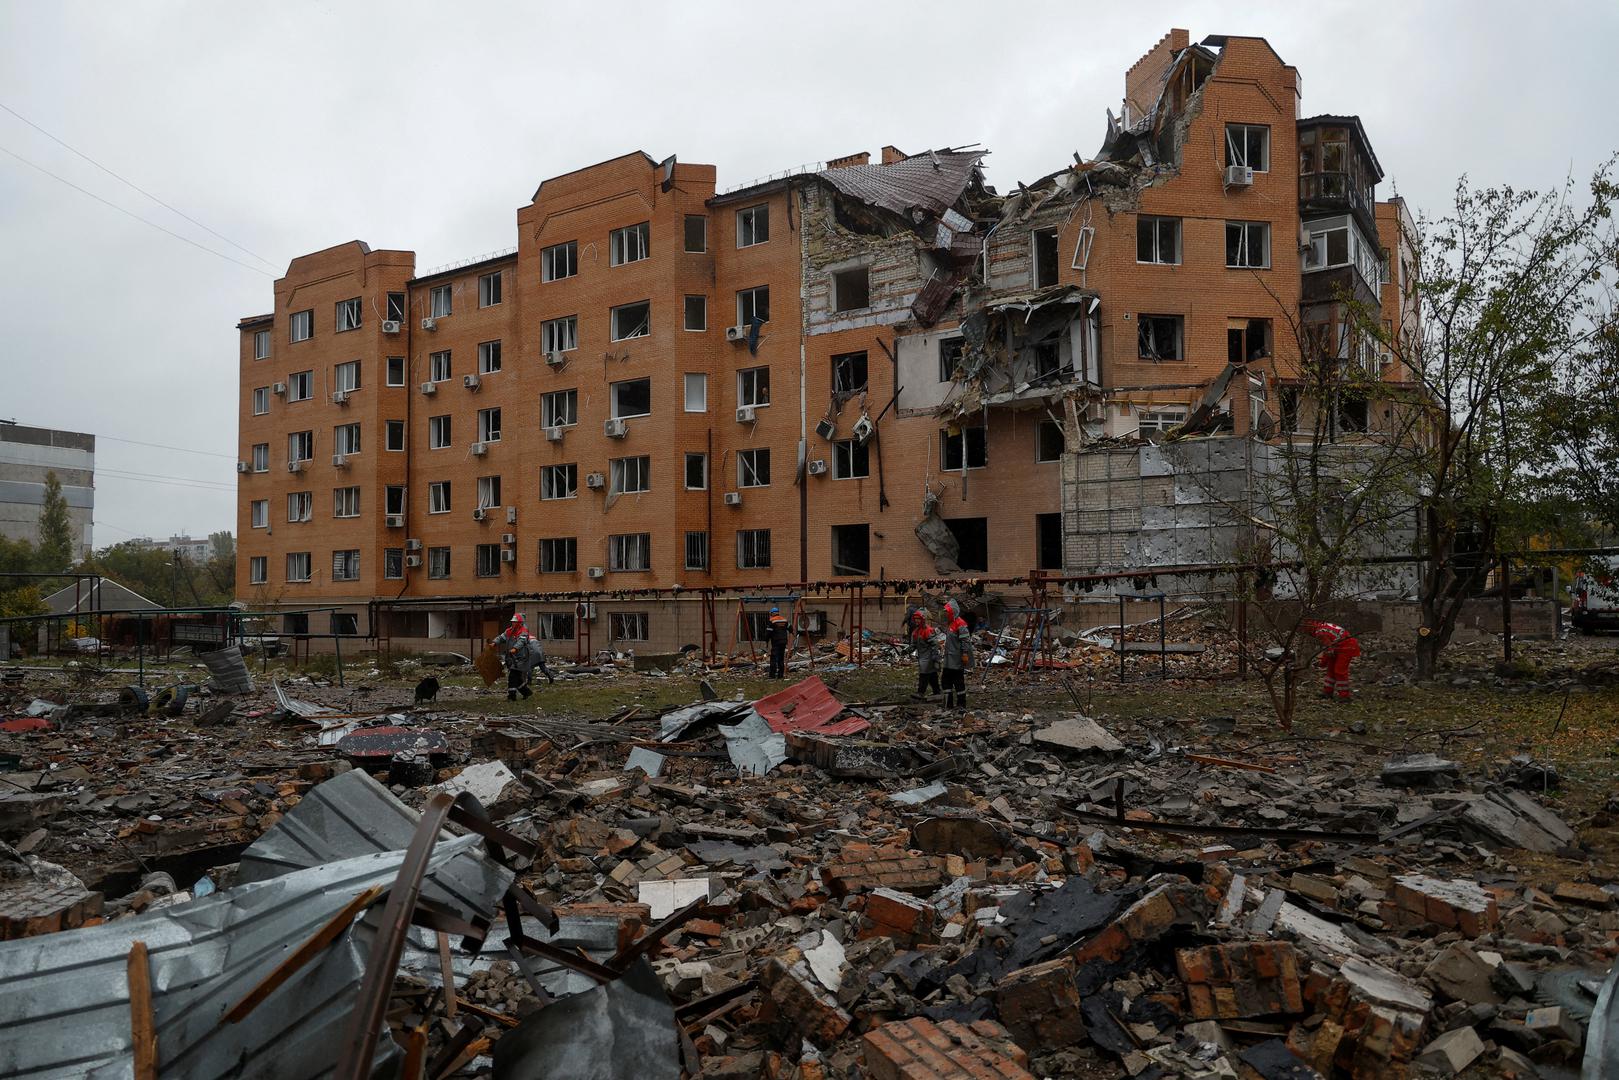 A view shows a residential building heavily damaged by a Russian missile attack in Mykolaiv, Ukraine October 23, 2022.  REUTERS/Valentyn Ogirenko Photo: VALENTYN OGIRENKO/REUTERS